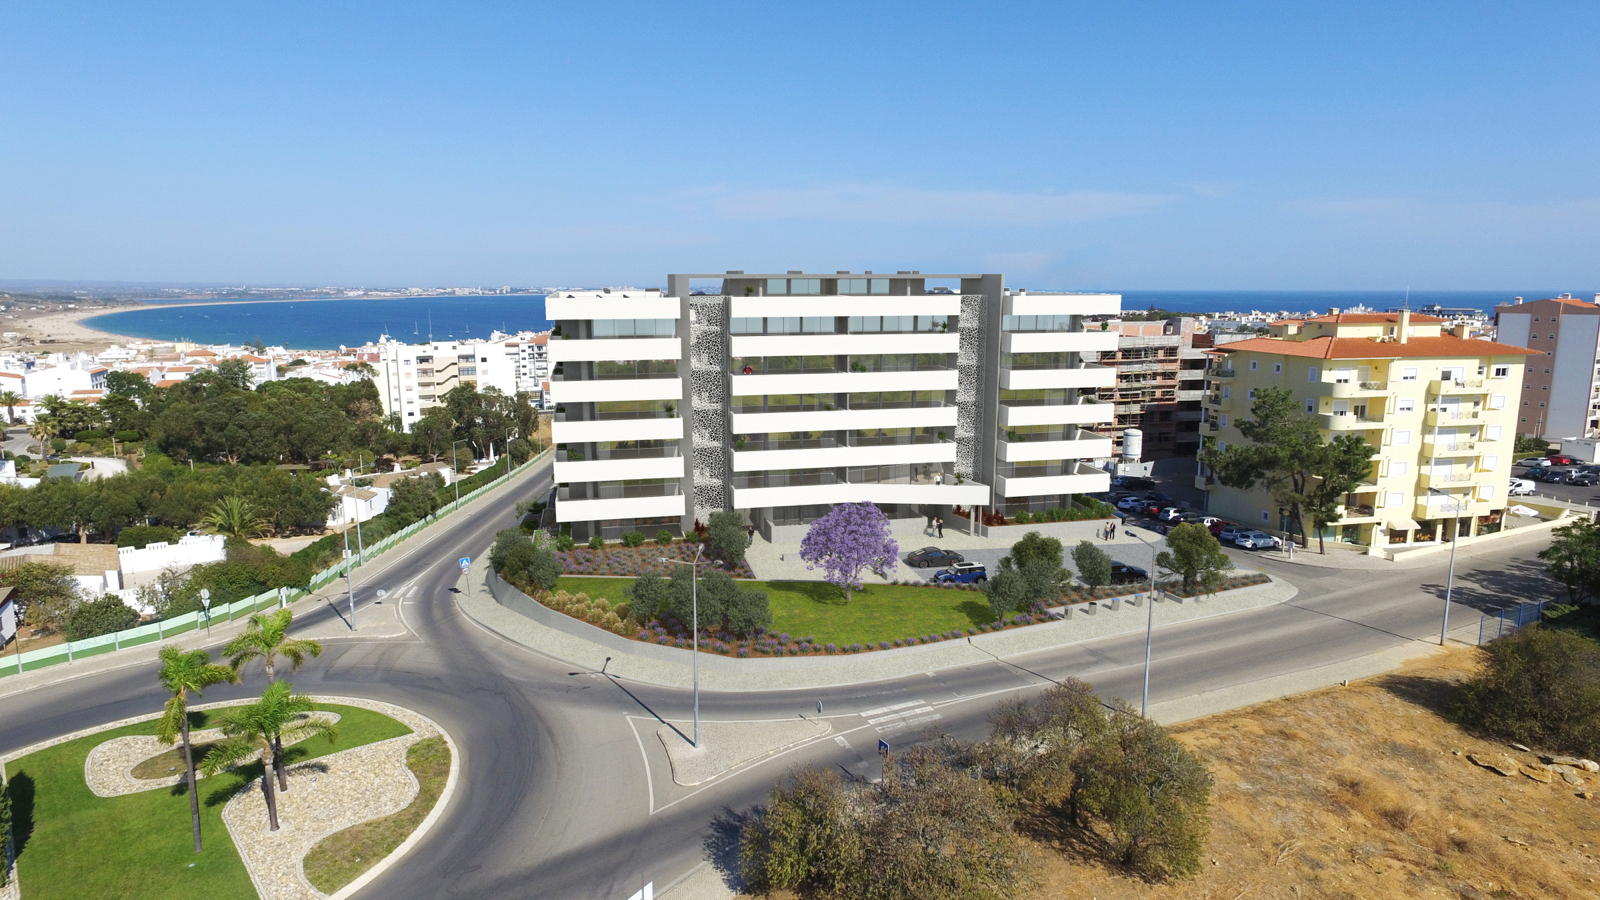 2 bedroom apartments with communal pool and sea views, Lagos, West Algarve | LG1199 Located in walking distance to the historic city of Lagos and close to Porto de Mós beach these apartments are built to exacting standards. Featuring solar panels, under floor heating, air conditioning, luxury fixtures and fittings and communal pool.